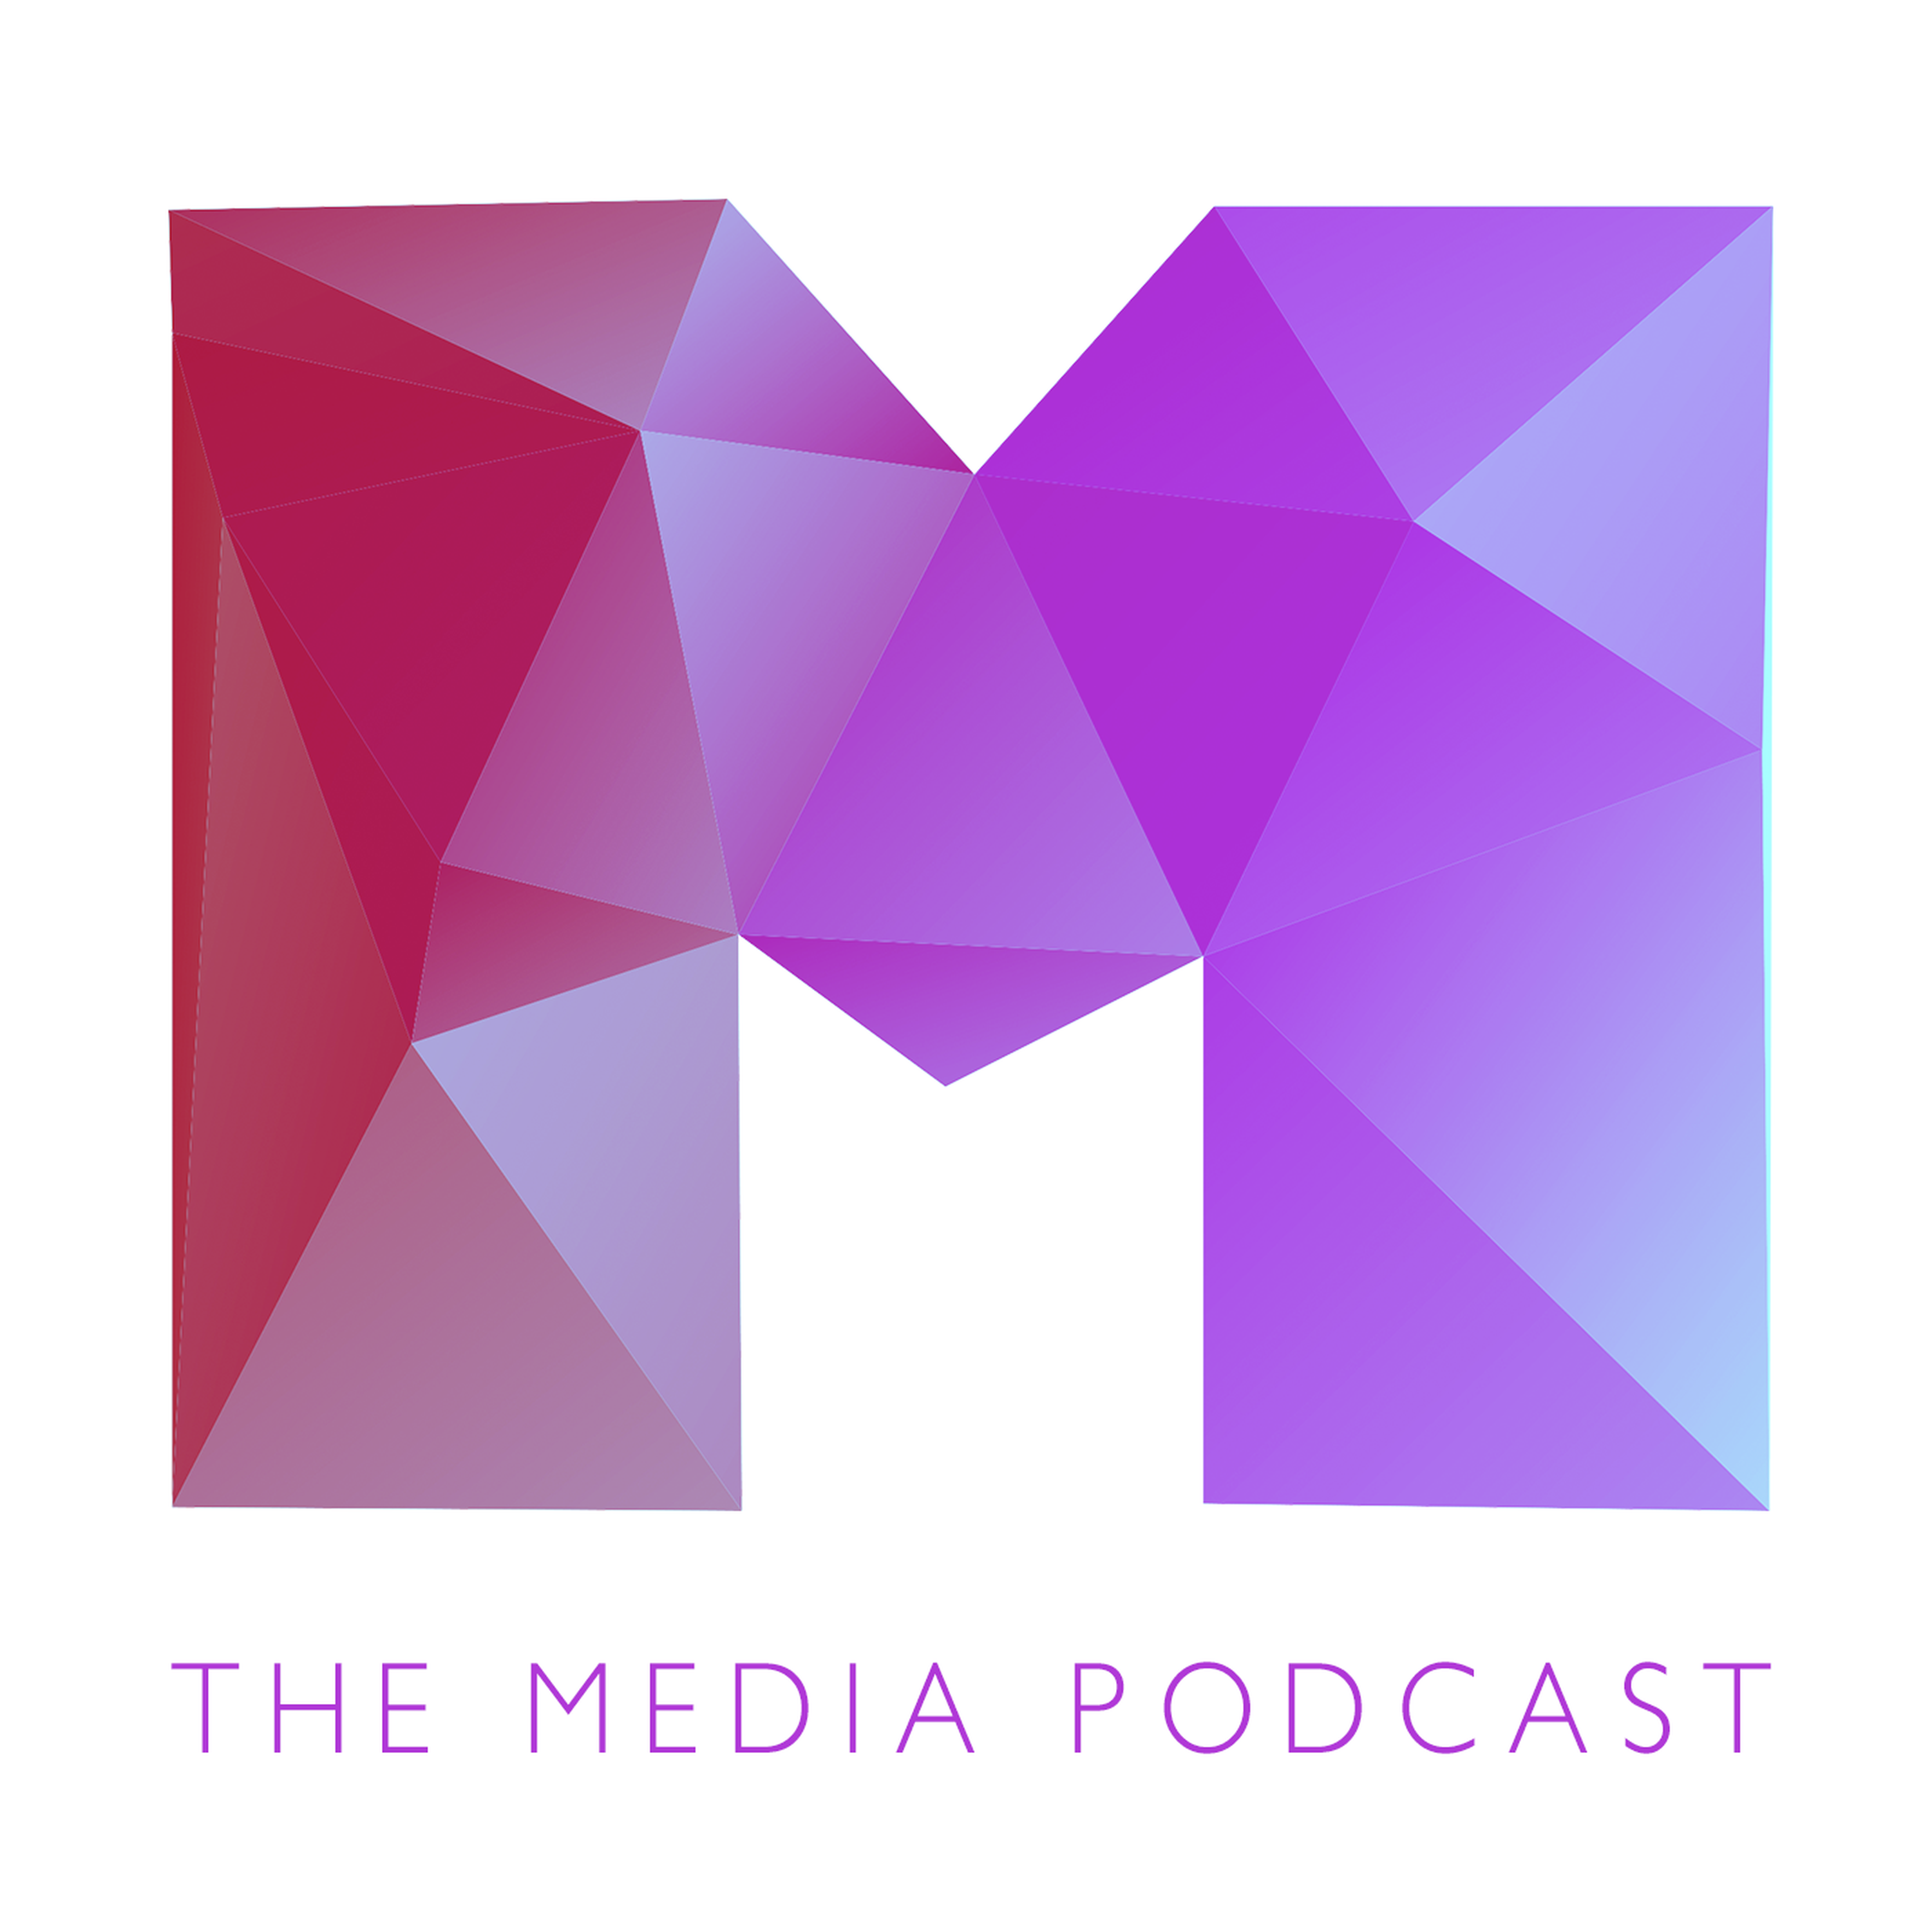 #92 - The Gender Pay Gap, Interns and a lifeline for Sky - The Media Podcast with Olly Mann